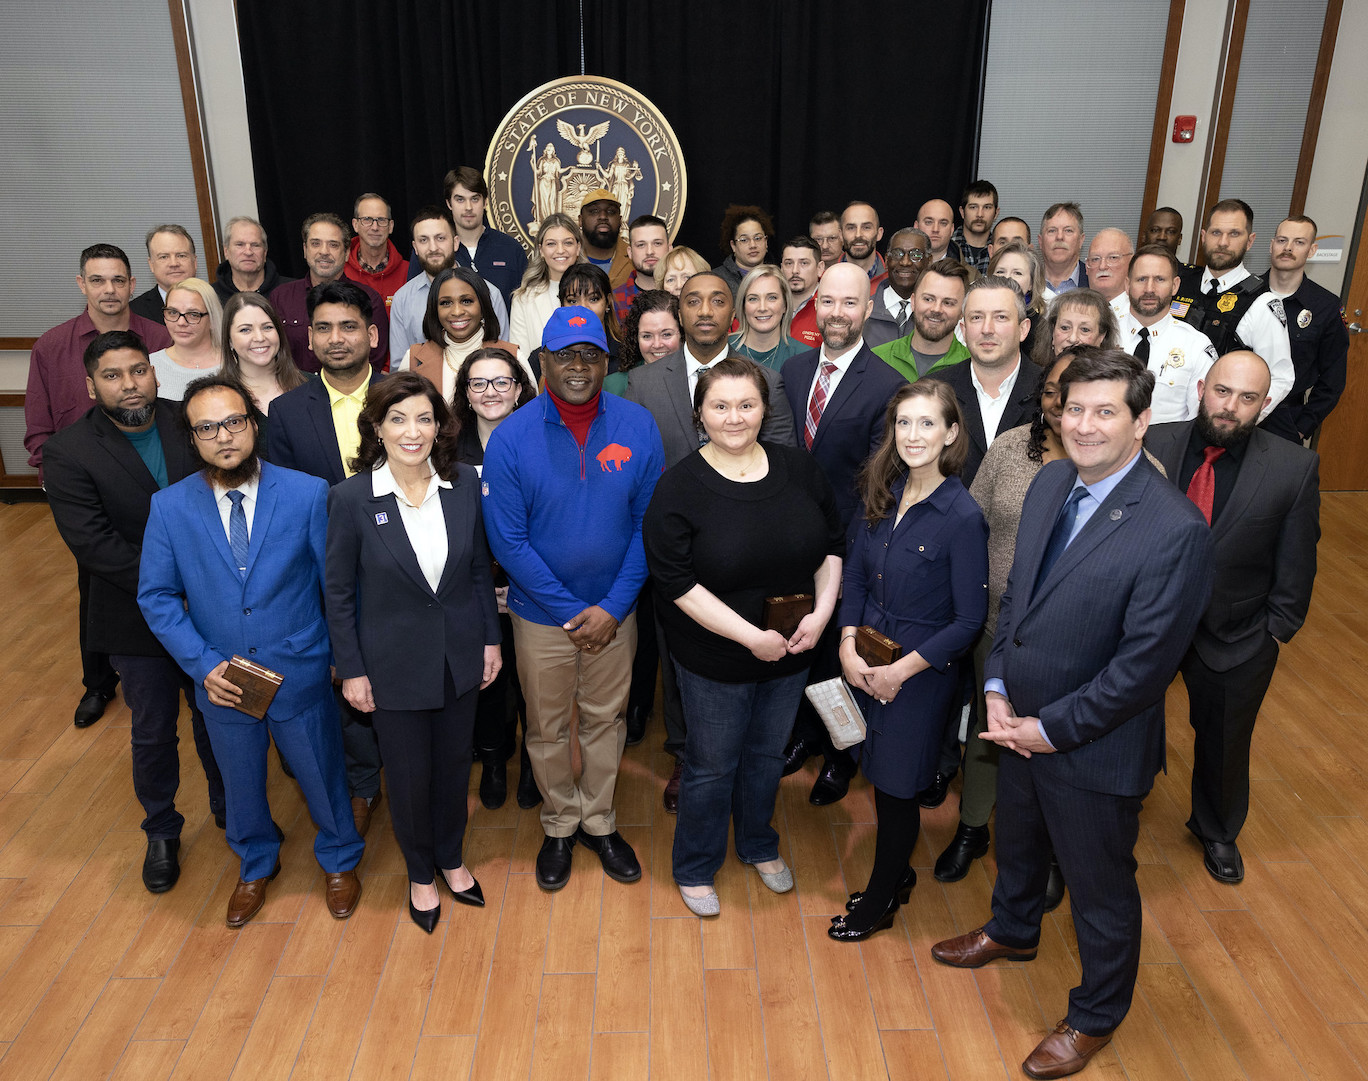 Gov. Kathy Hochul recognizes first responders and community heroes for their actions during the December blizzard in Buffalo. (Photo by Mike Groll/Office of Gov. Kathy Hochul)